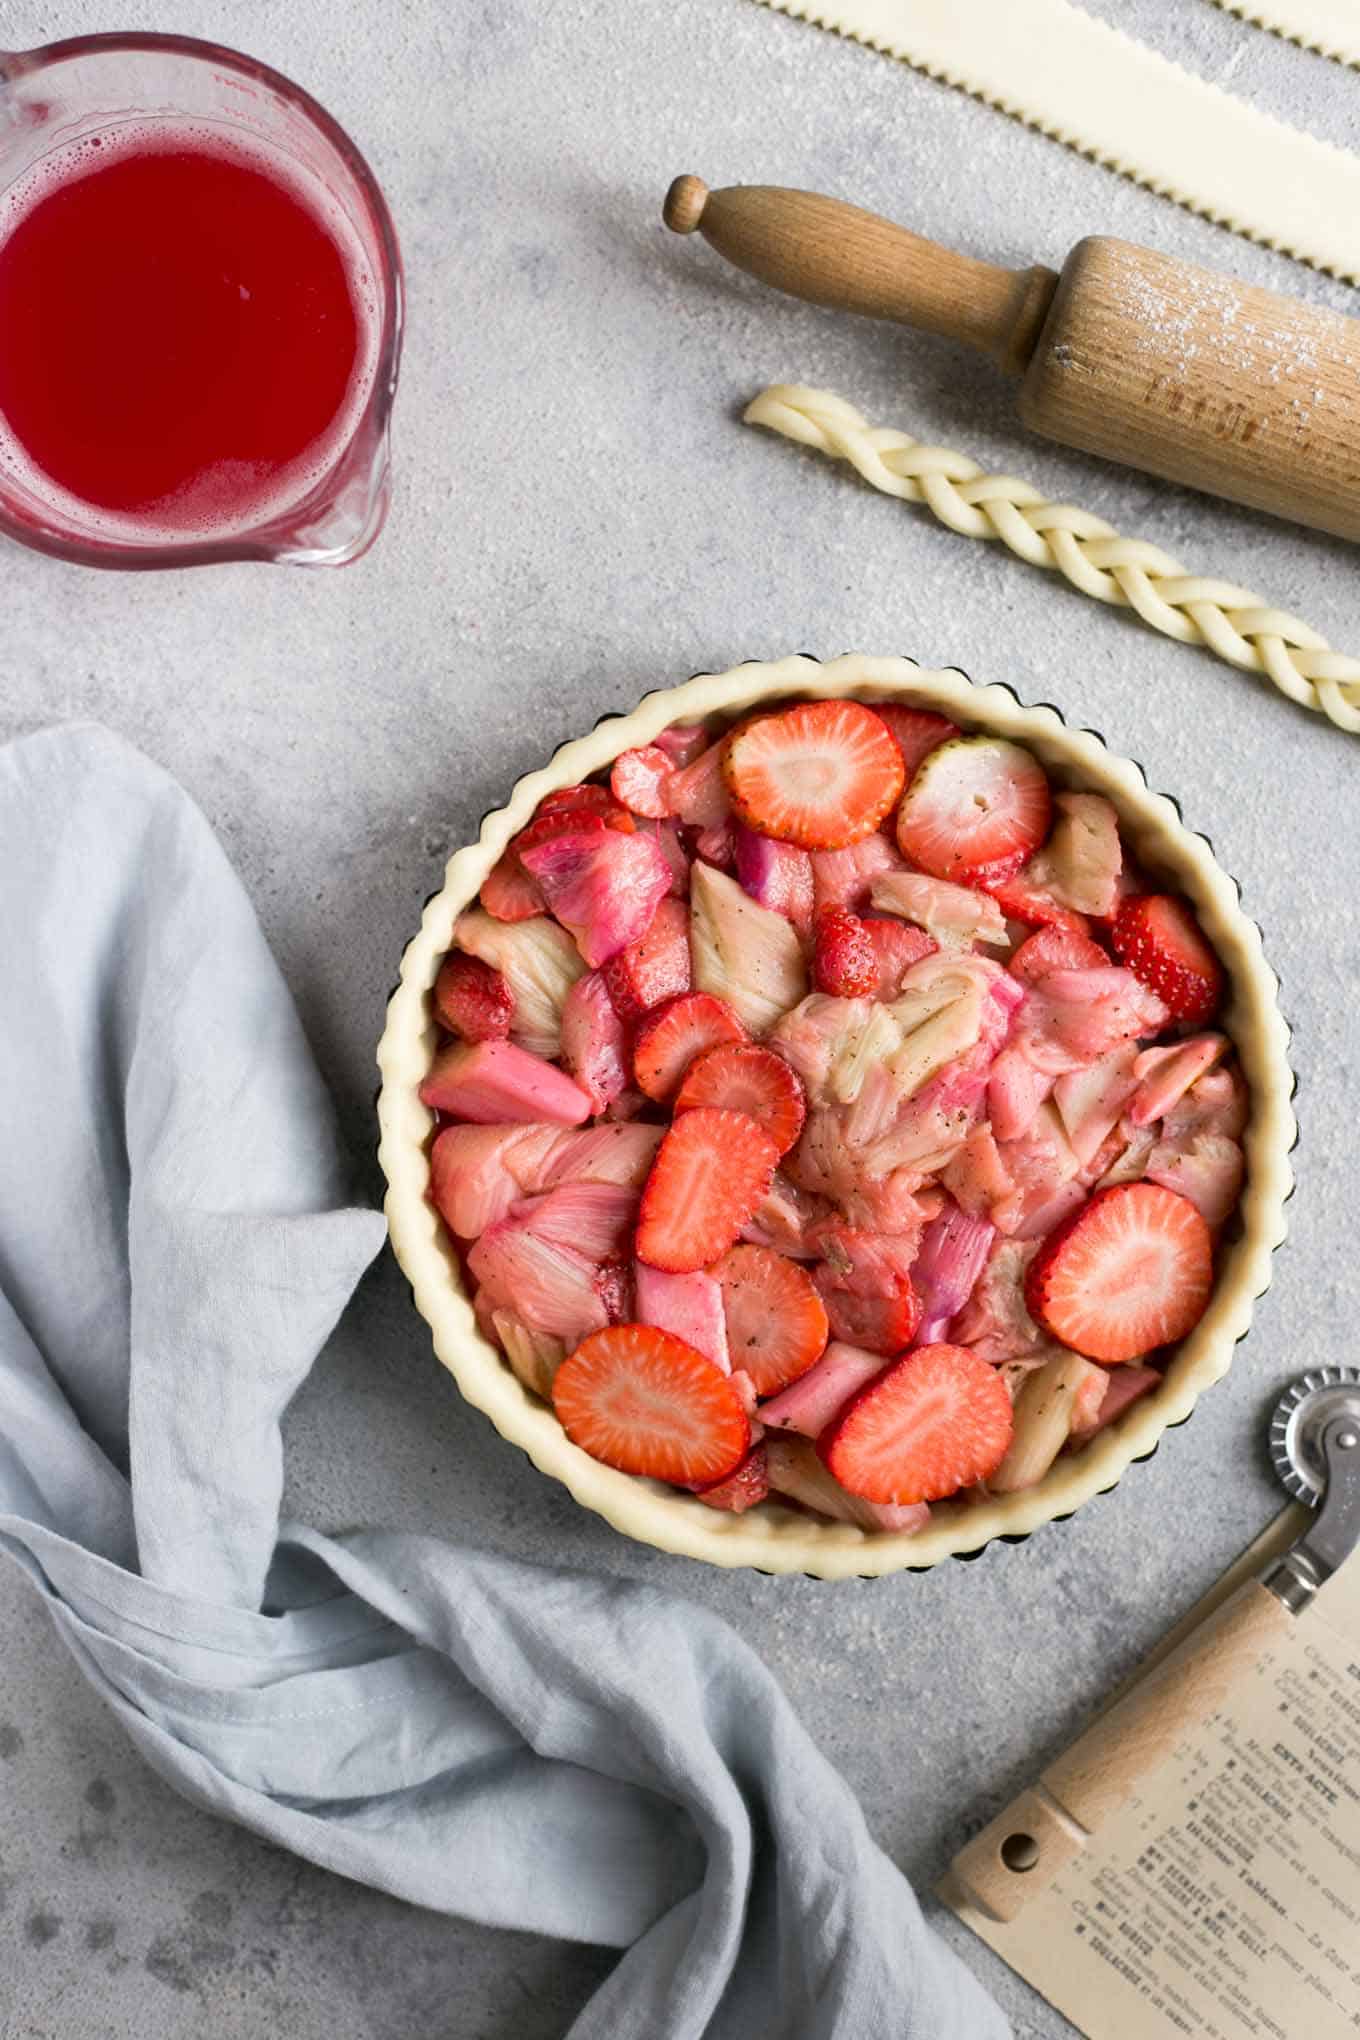 Classic rhubarb strawberry pie. Easy and delicious recipe for a whole family! #vegetarian #rhubarb #pie | via @annabanana.co